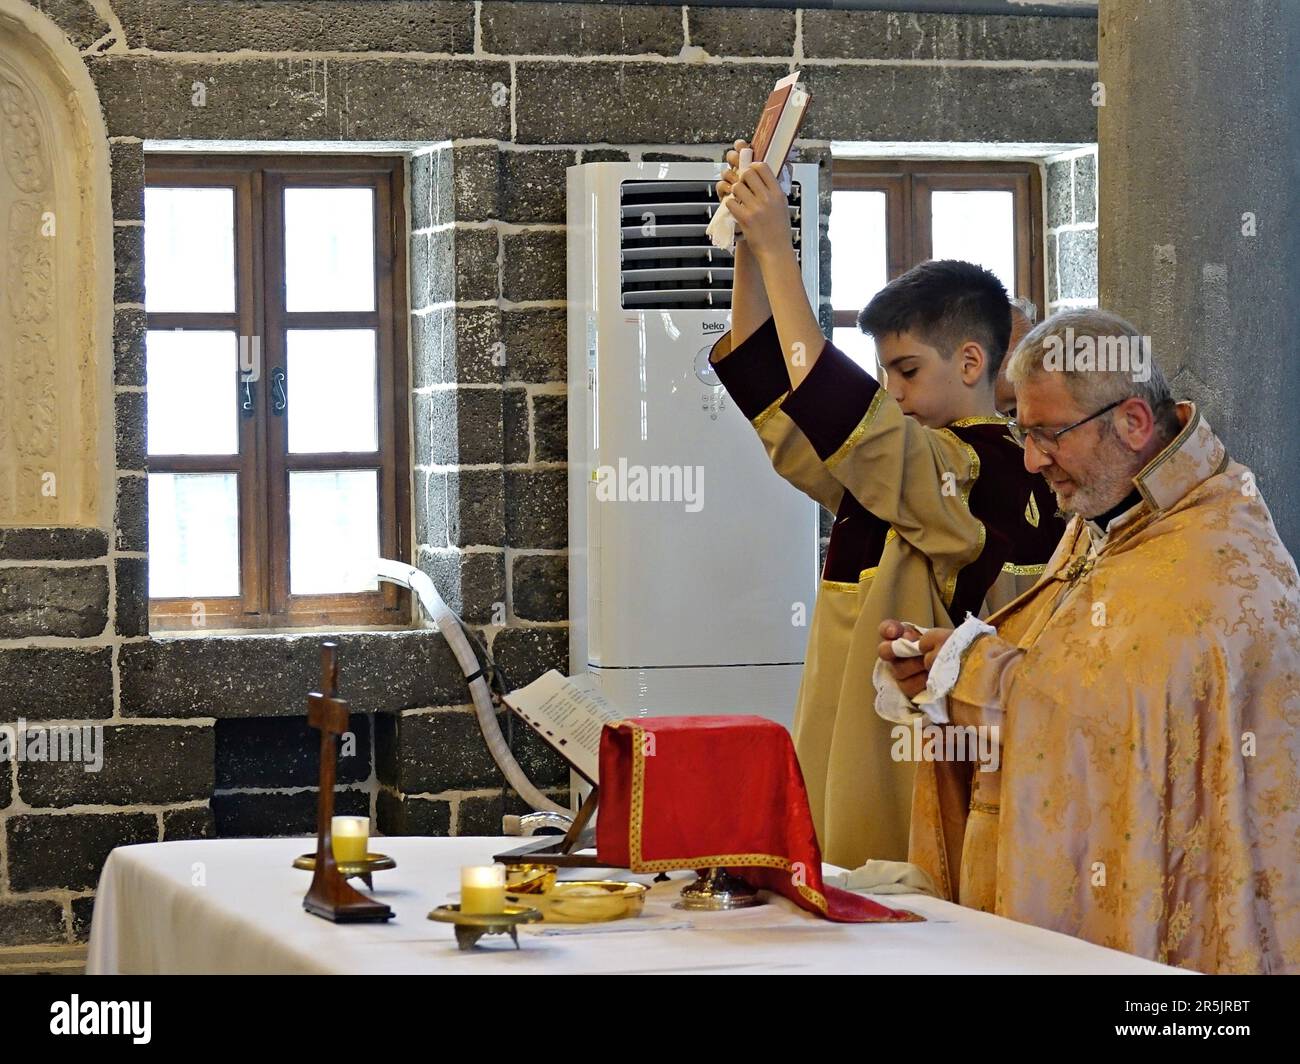 A young man holds up a holy book, the Bible during the ritual at Diyarbak?r Surp Hovsep Church. At the Surp Hovsep Armenian Catholic Church, which was heavily damaged in clashes between armed Kurdish PKK militants and Turkish security forces in the center of Diyarbakir in 2015 and repaired as a result of a 4-year restoration, the second ritual in the last 100 years after the first ritual in 2021. Very few Armenians who came from Istanbul and lived in Diyarbakir attended the ceremony. The ritual was led by Senior Priest Abraham Firat and Subordinate Deacon Jan Acemoglu, who were ordained from I Stock Photo